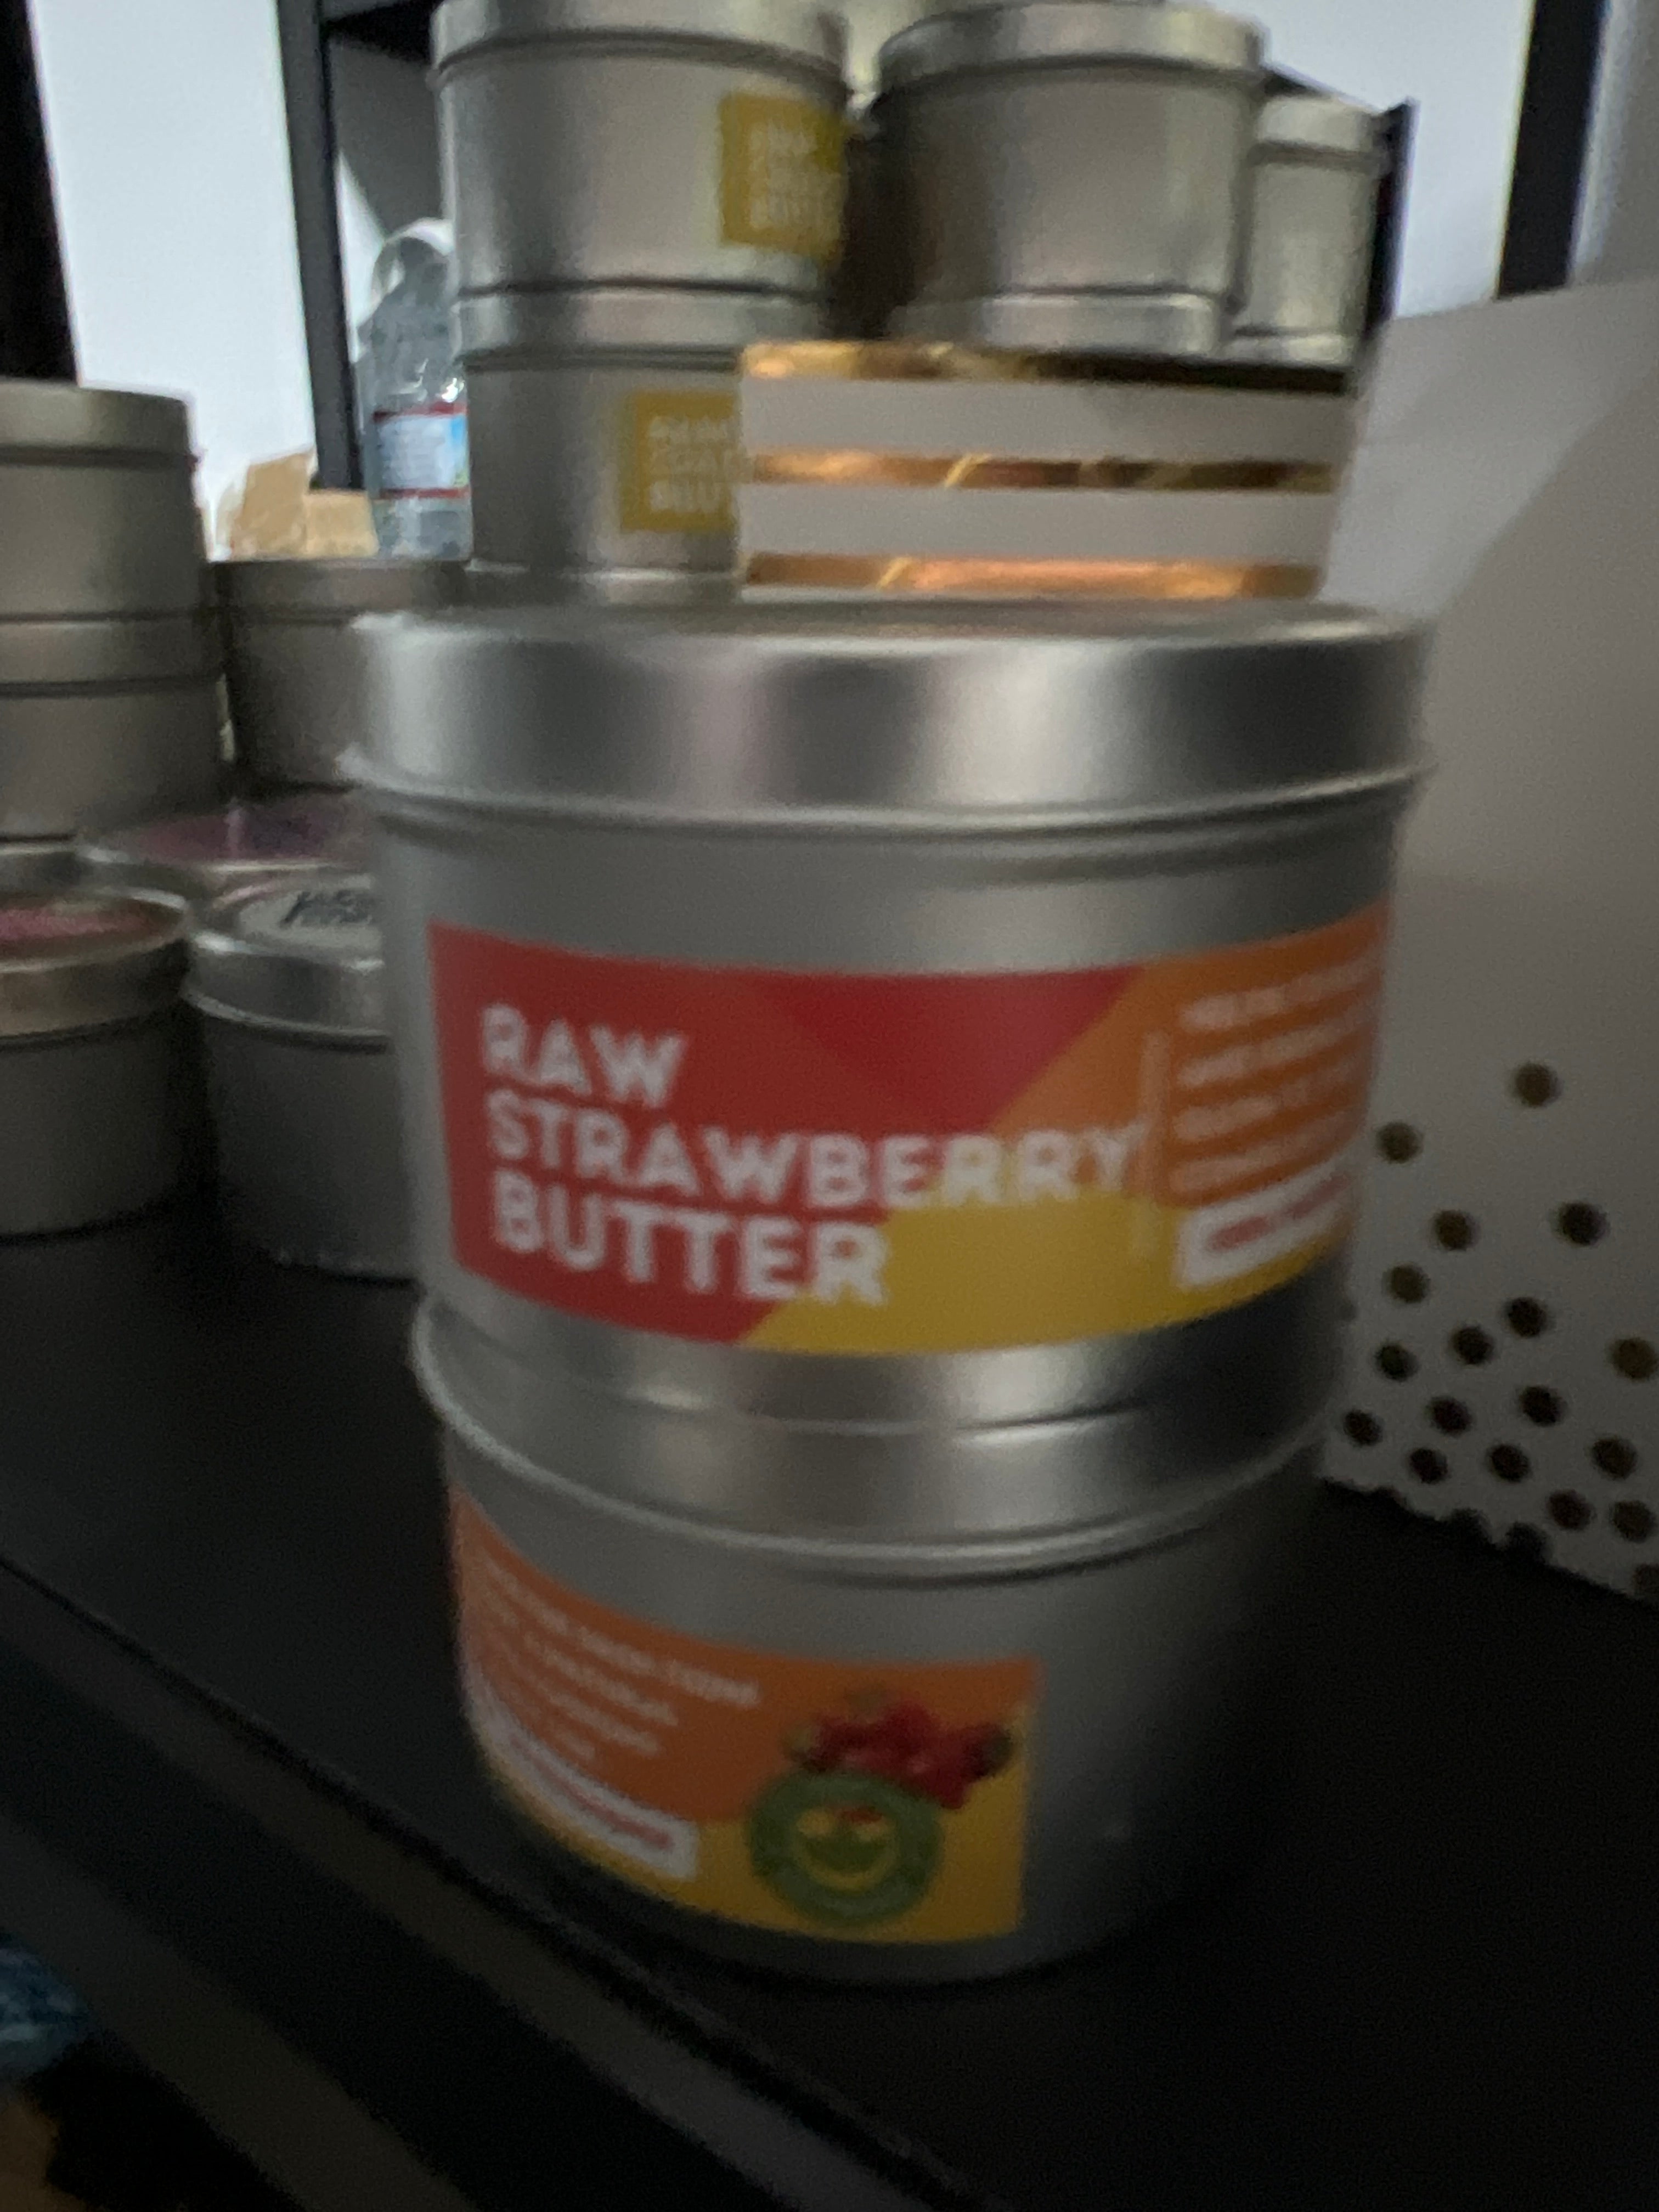 Raw butter strawberry large